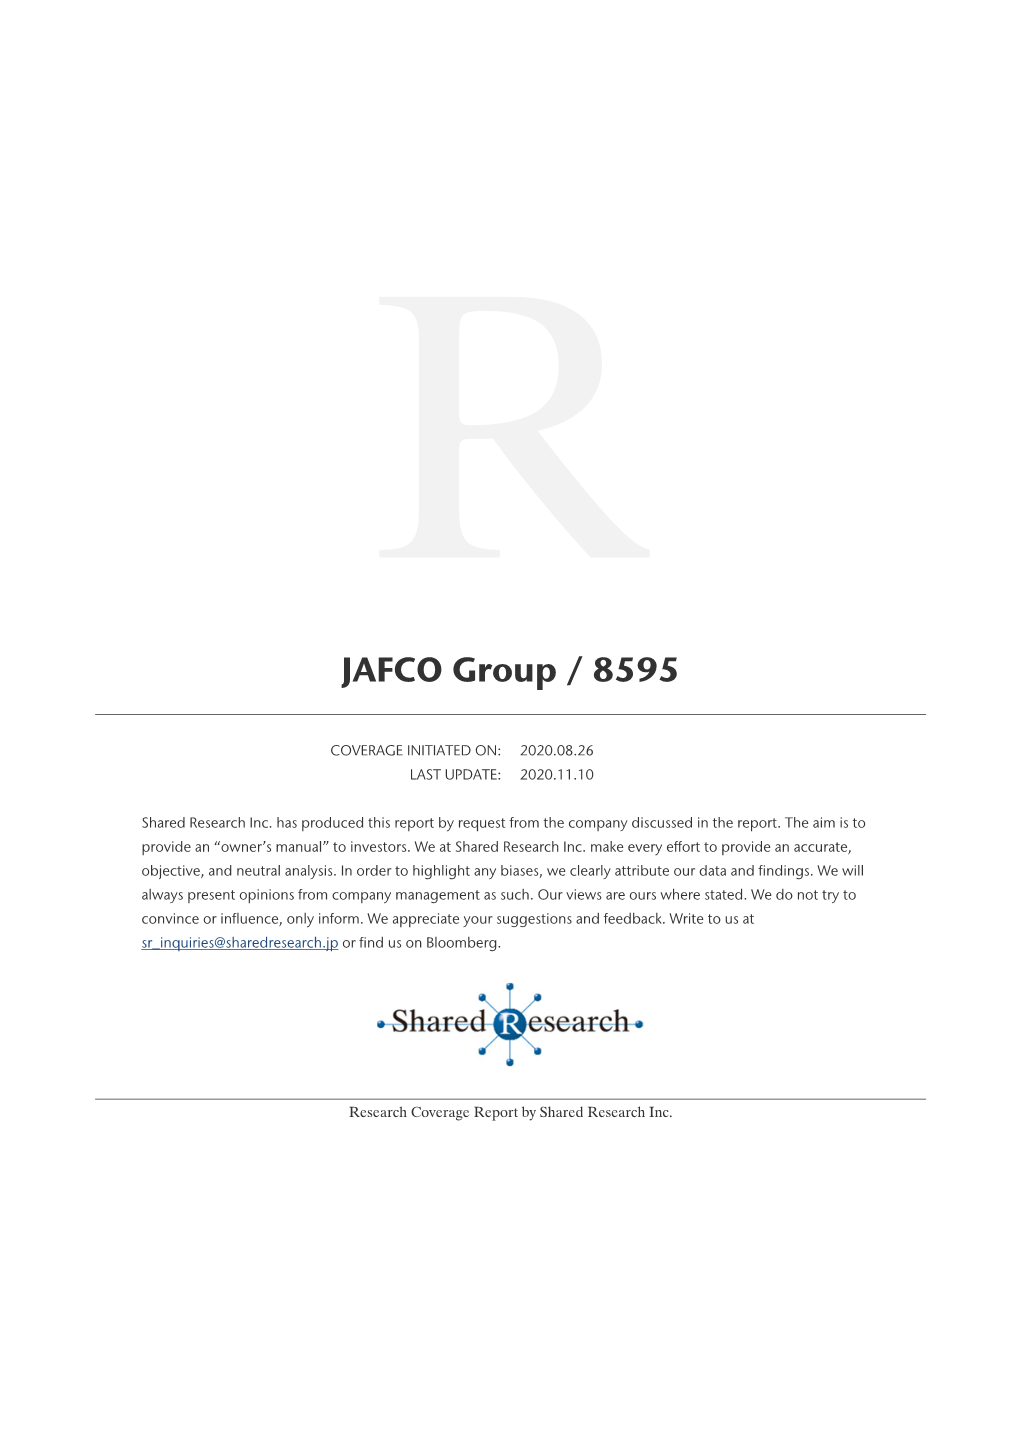 JAFCO Group / 8595